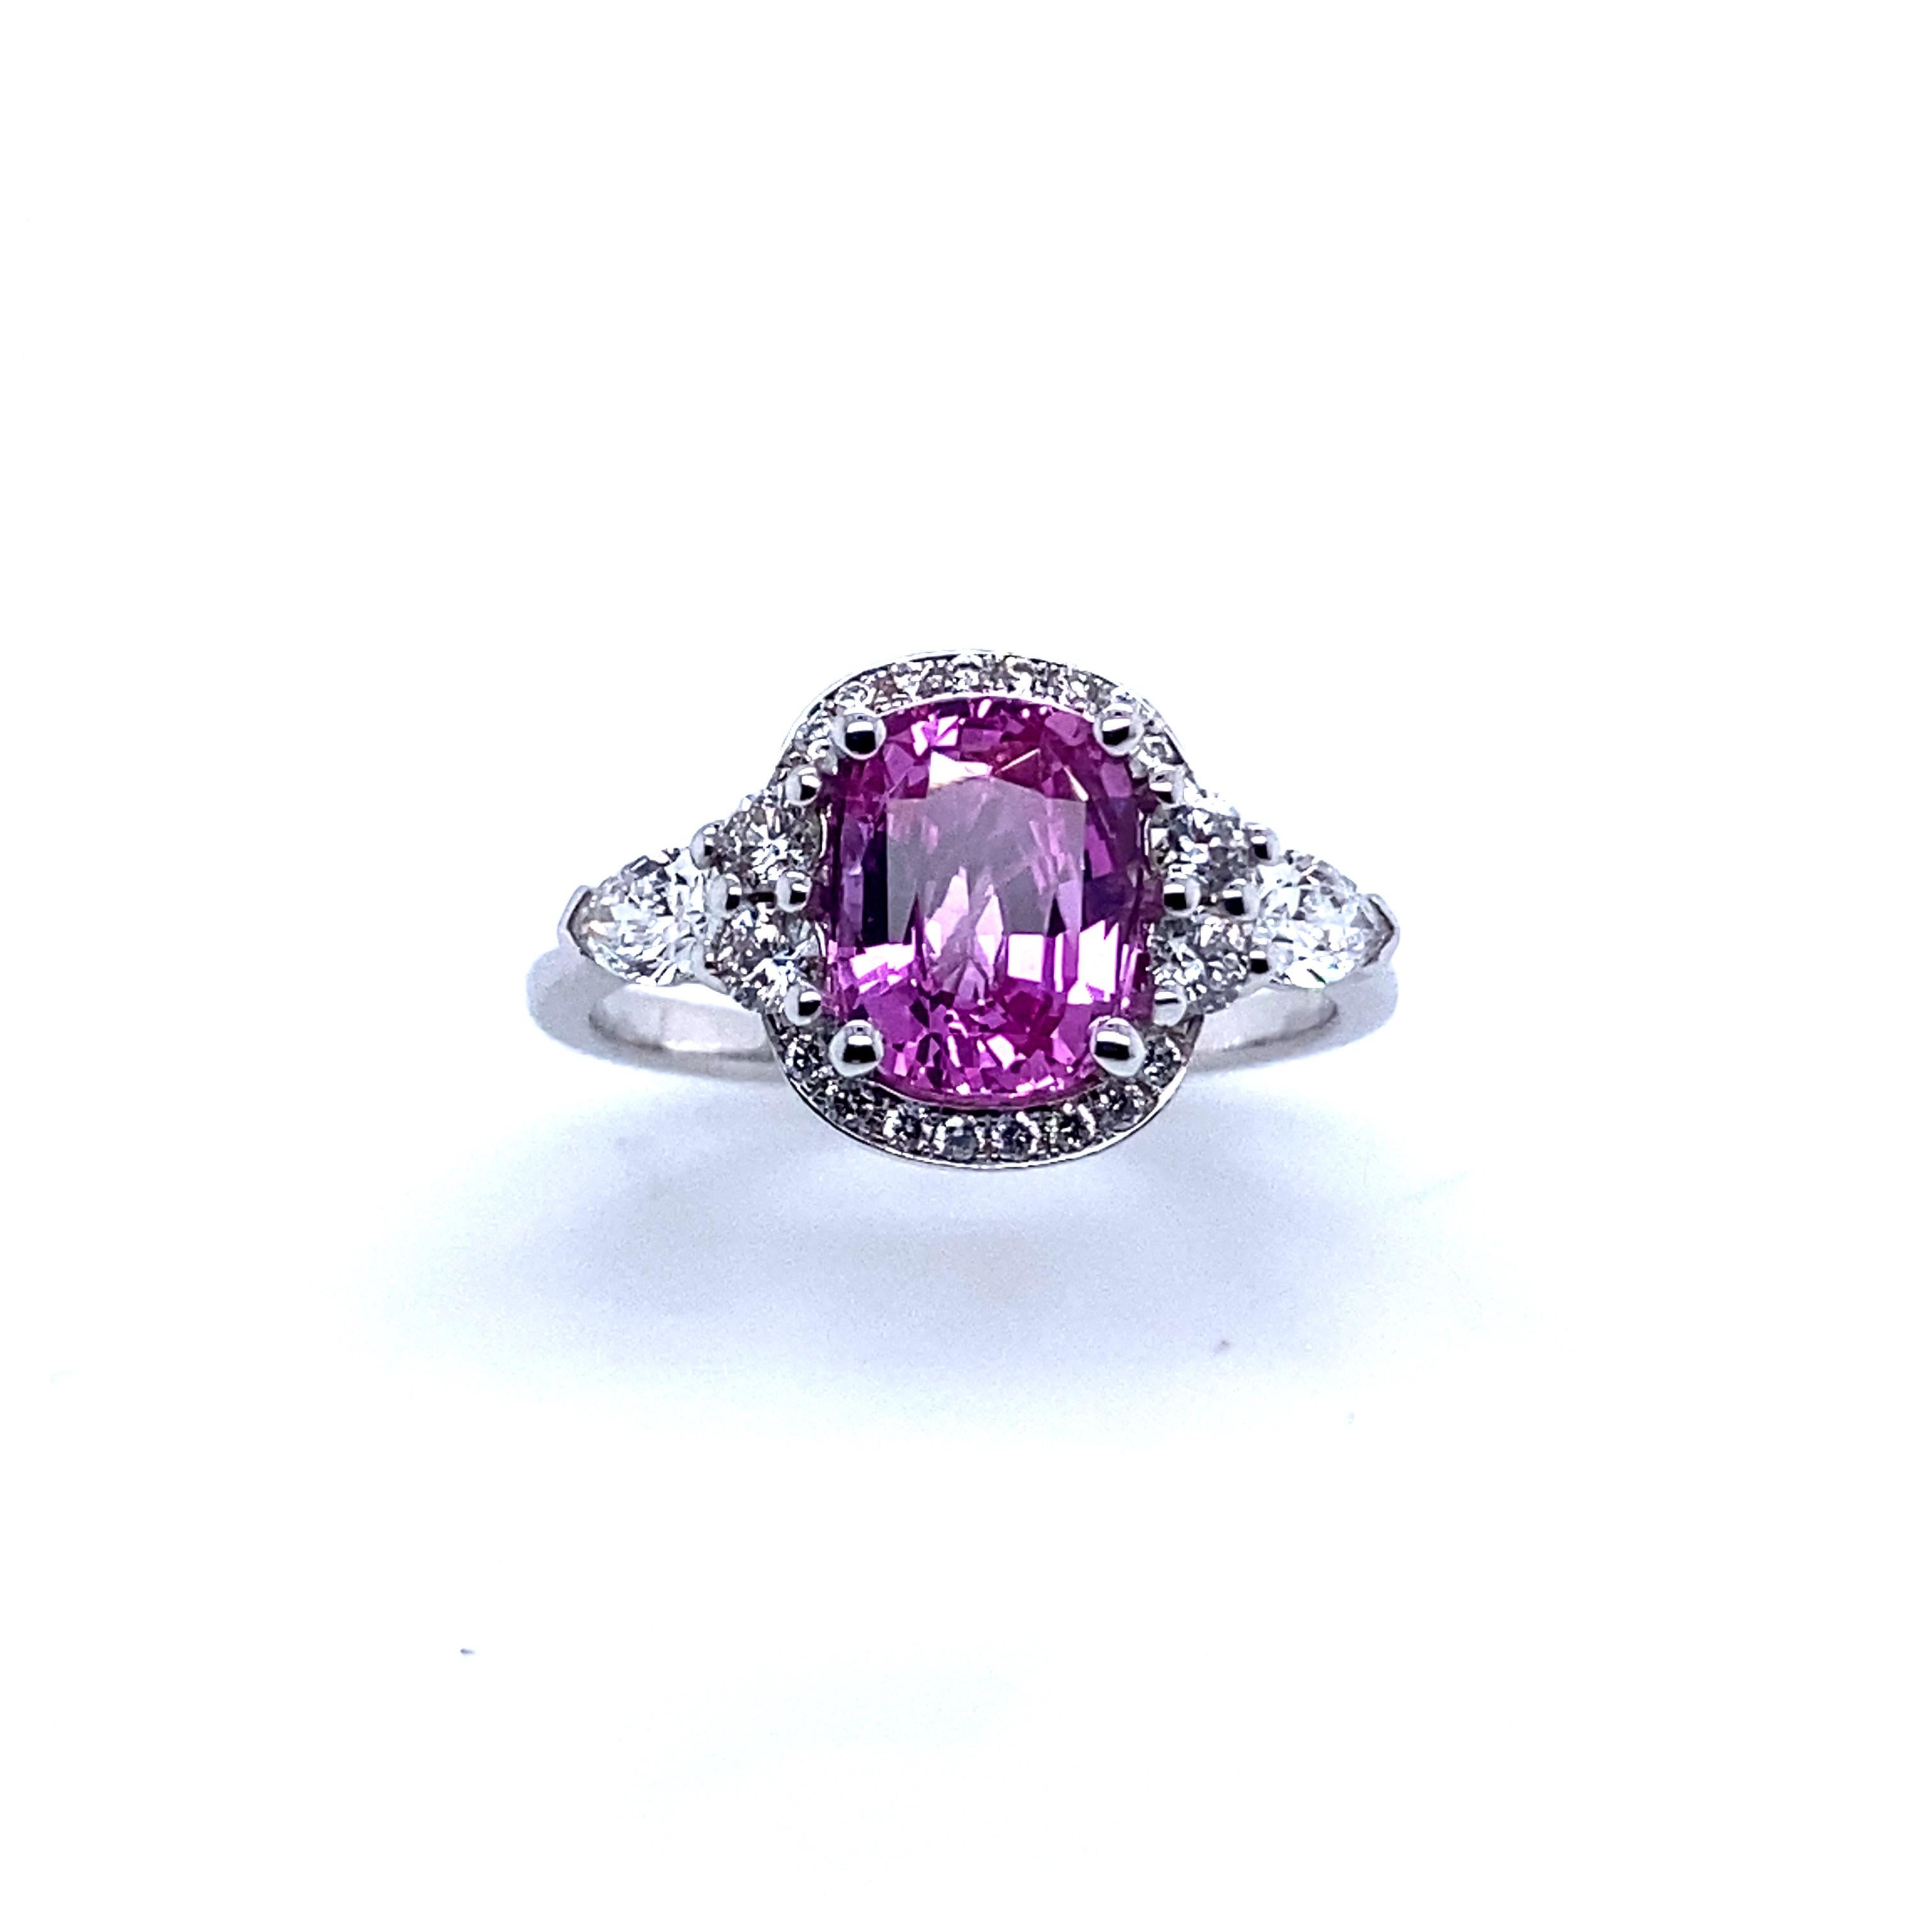 Cushion Cut Gold Engagement Ring Surmounted by a Pink Sapphire Surrounded by Diamonds